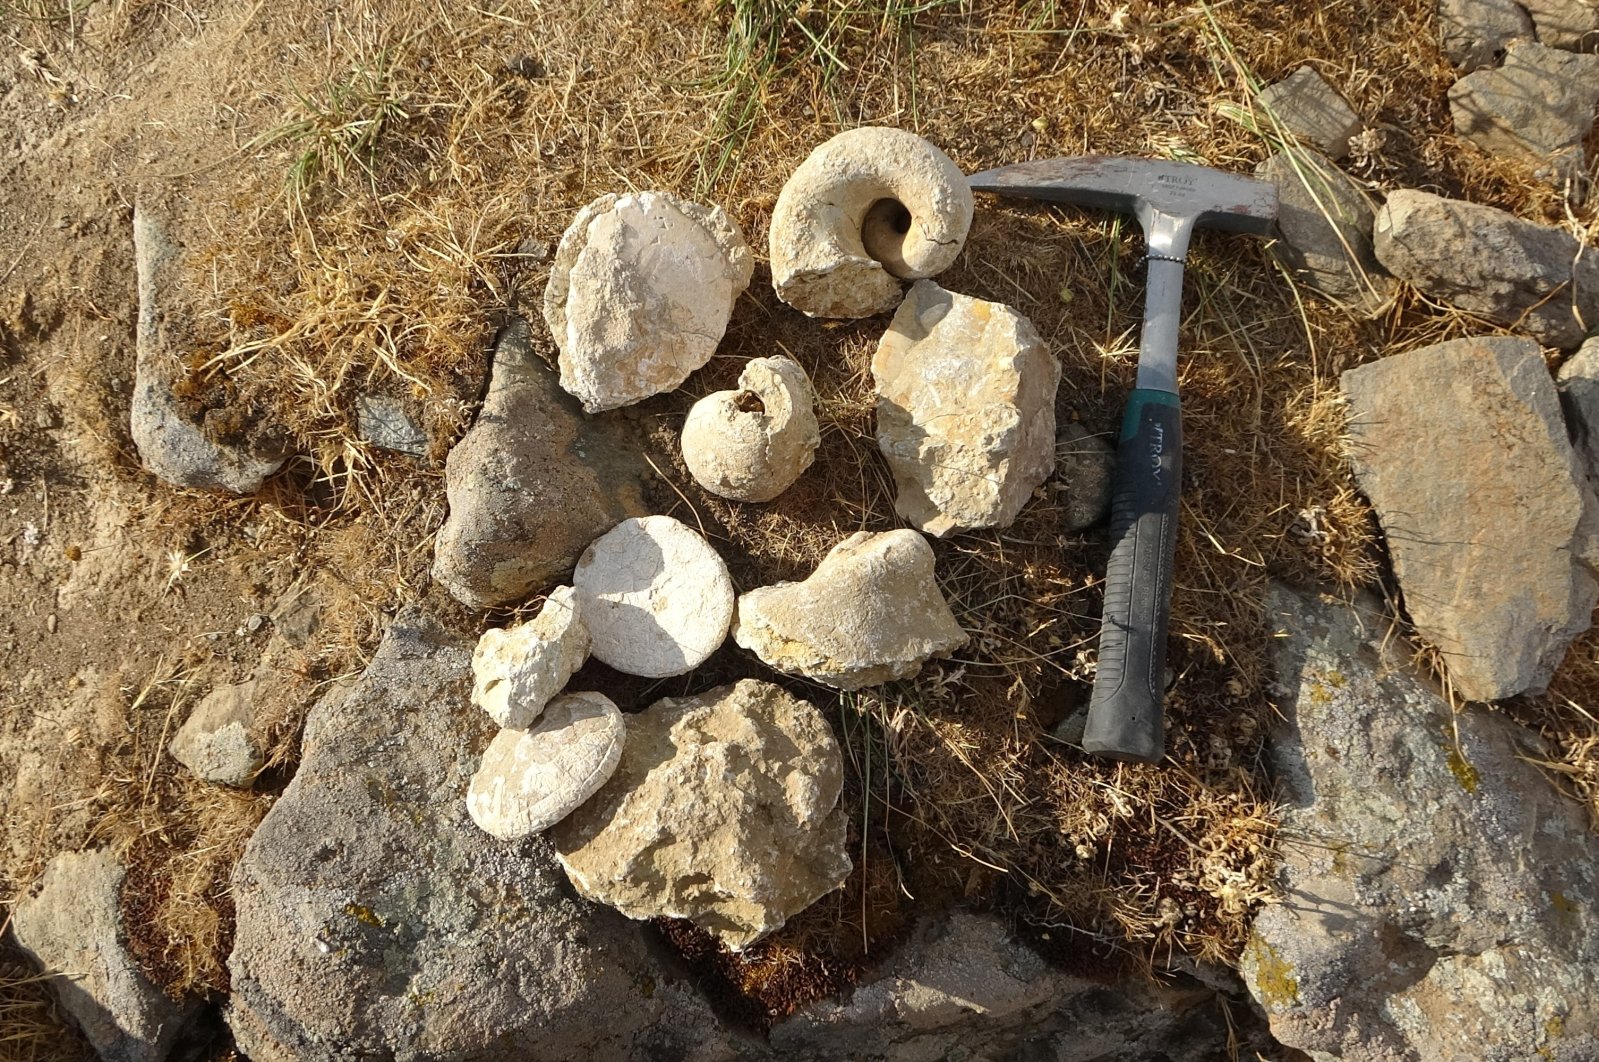 Fossils unearthed in Muş, eastern Turkey, Aug. 14, 2021. (IHA Photo)